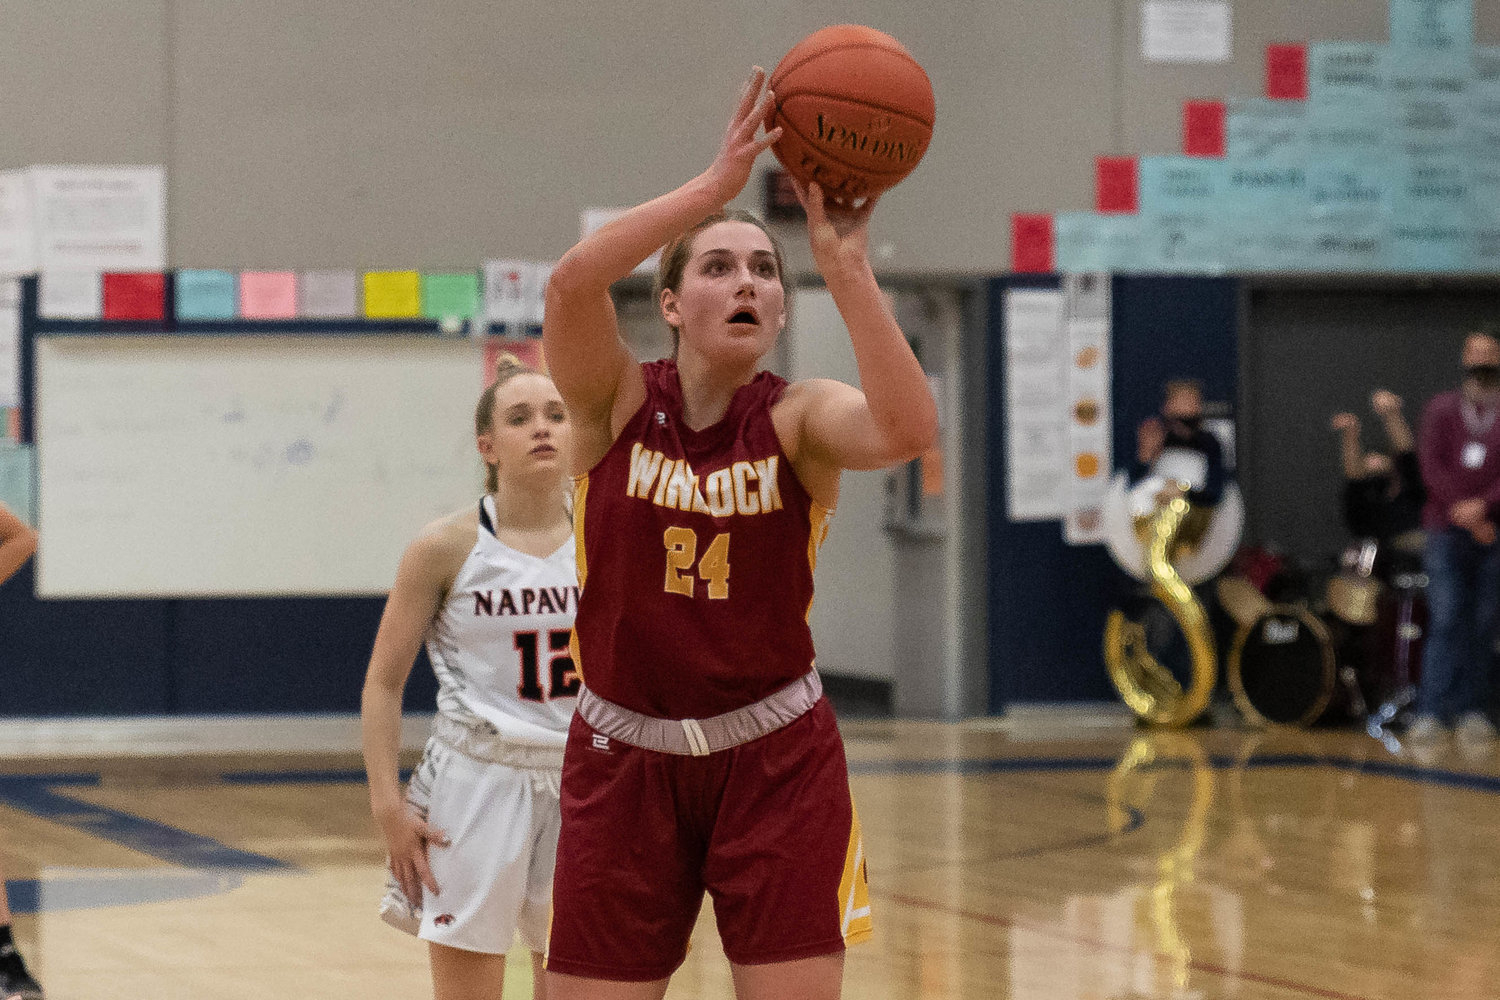 Winlock forward Addison Hall attempts a free throw against Napavine in the 2B District 4 tournament at Black Hills Feb. 10.